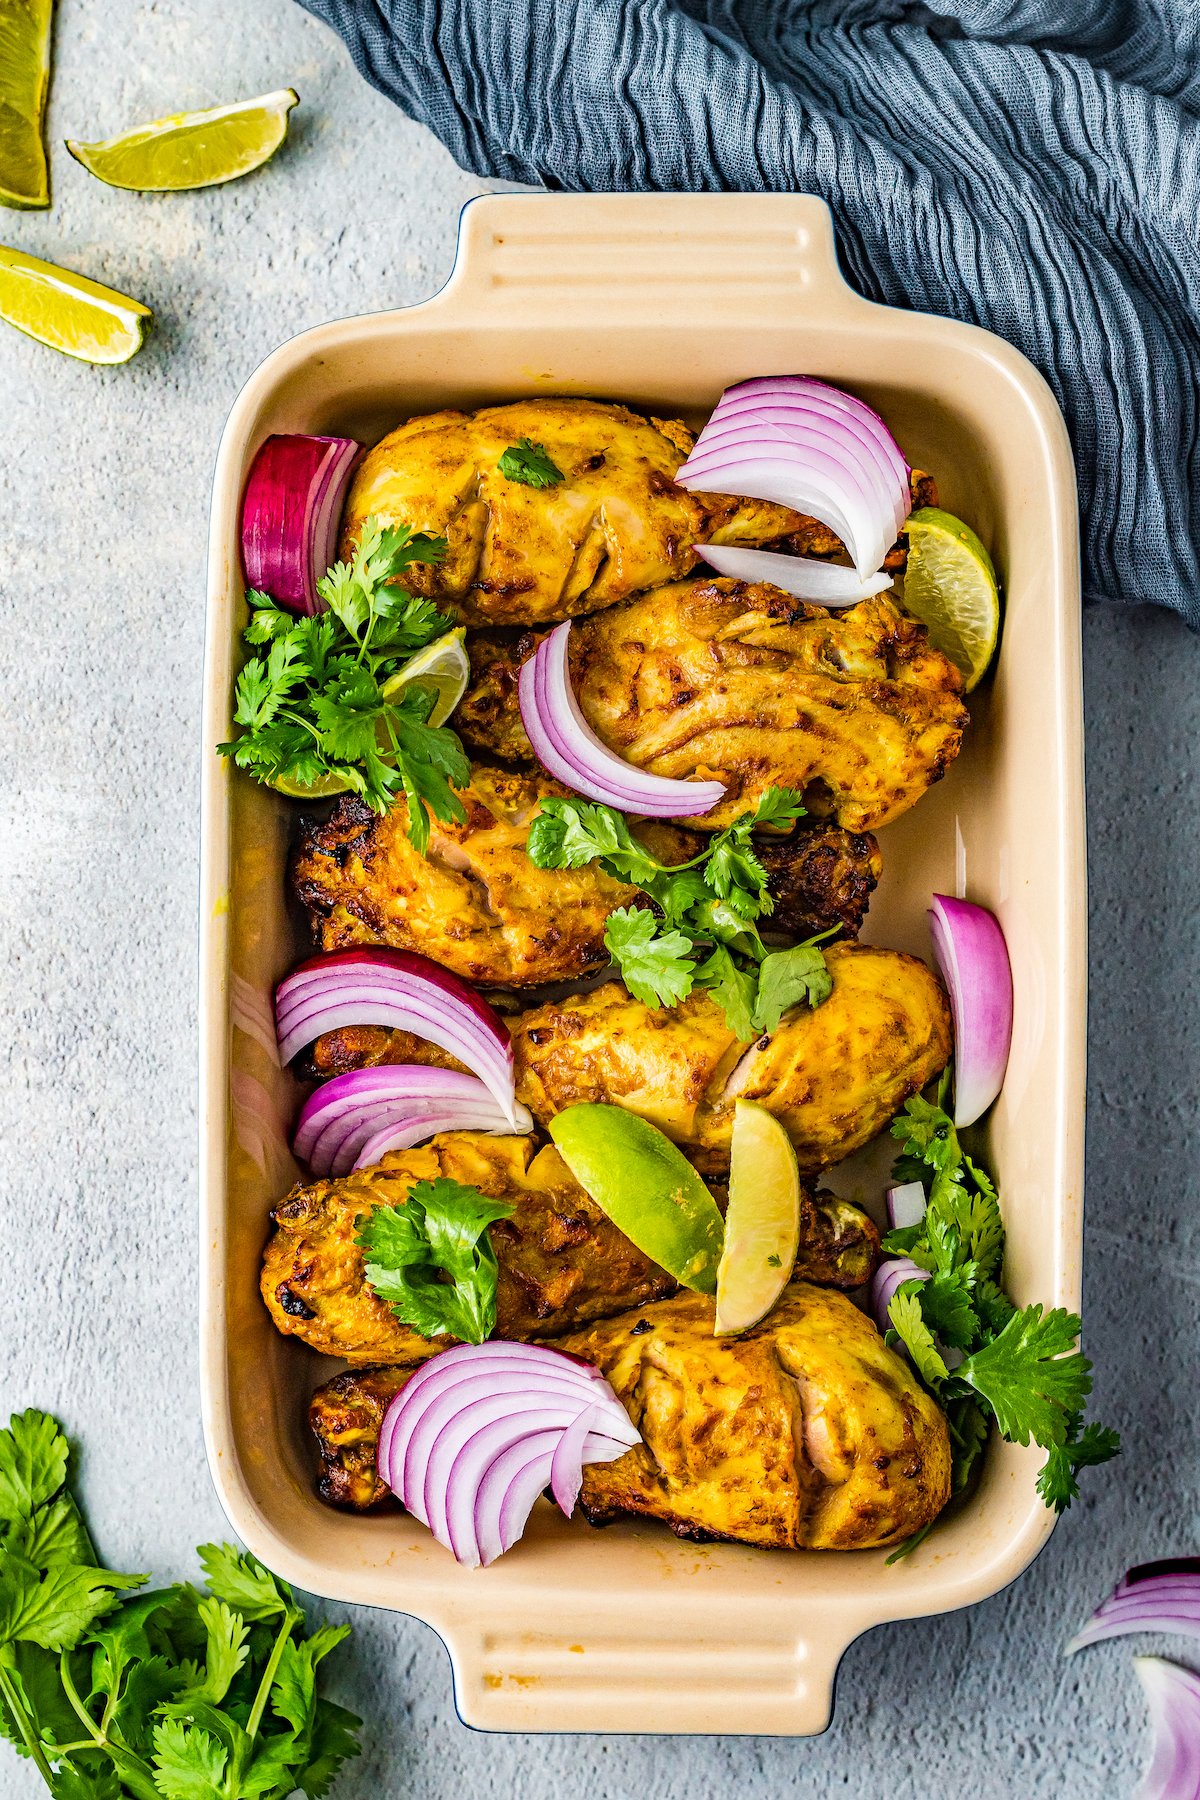 Baked tandoori chicken in a serving dish, garnished with herbs and red onion wedges.